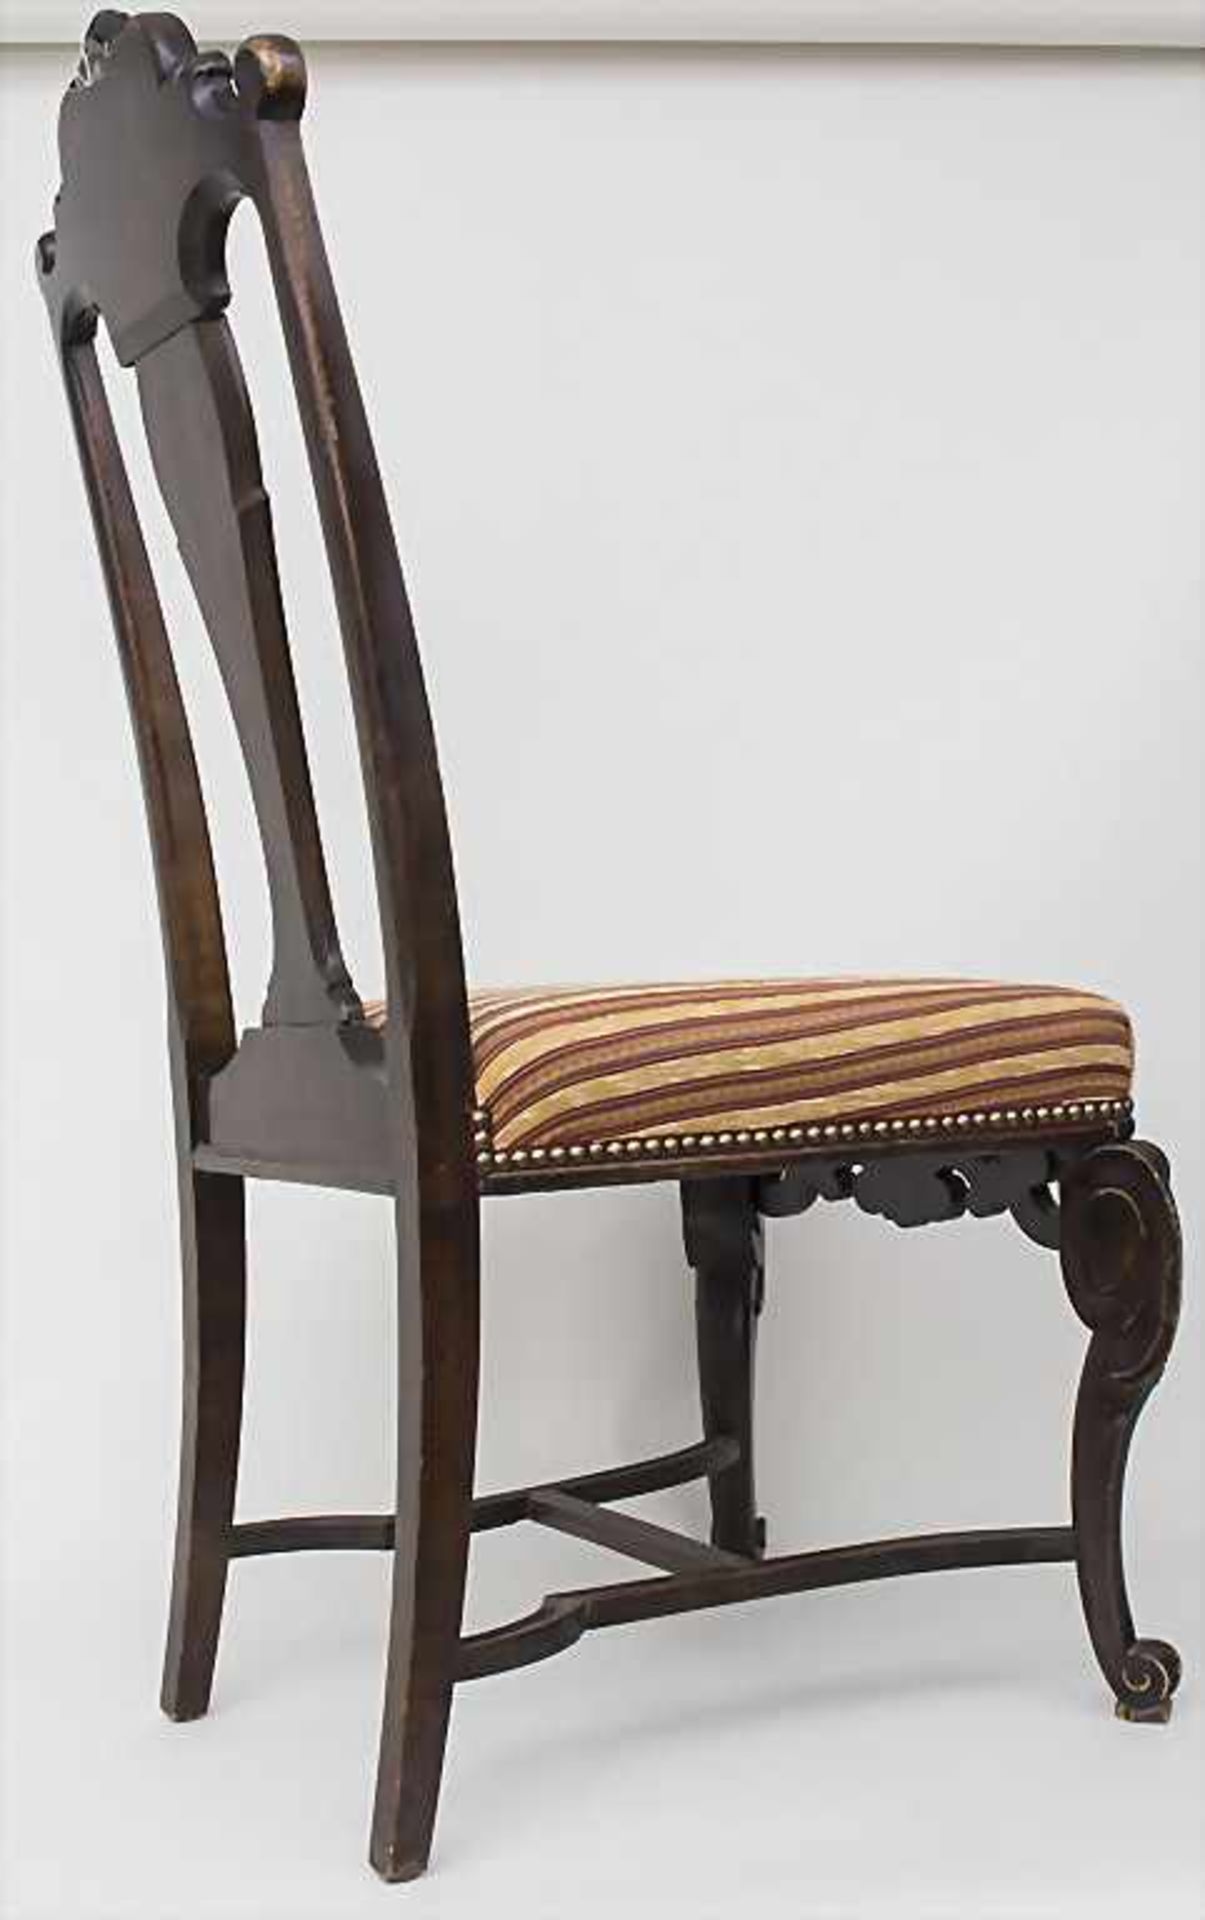 Paar Historismus-Stühle / A pair of historism chairs, 19. Jh.Material: Holz, dunkel gebeizt, - Image 3 of 5